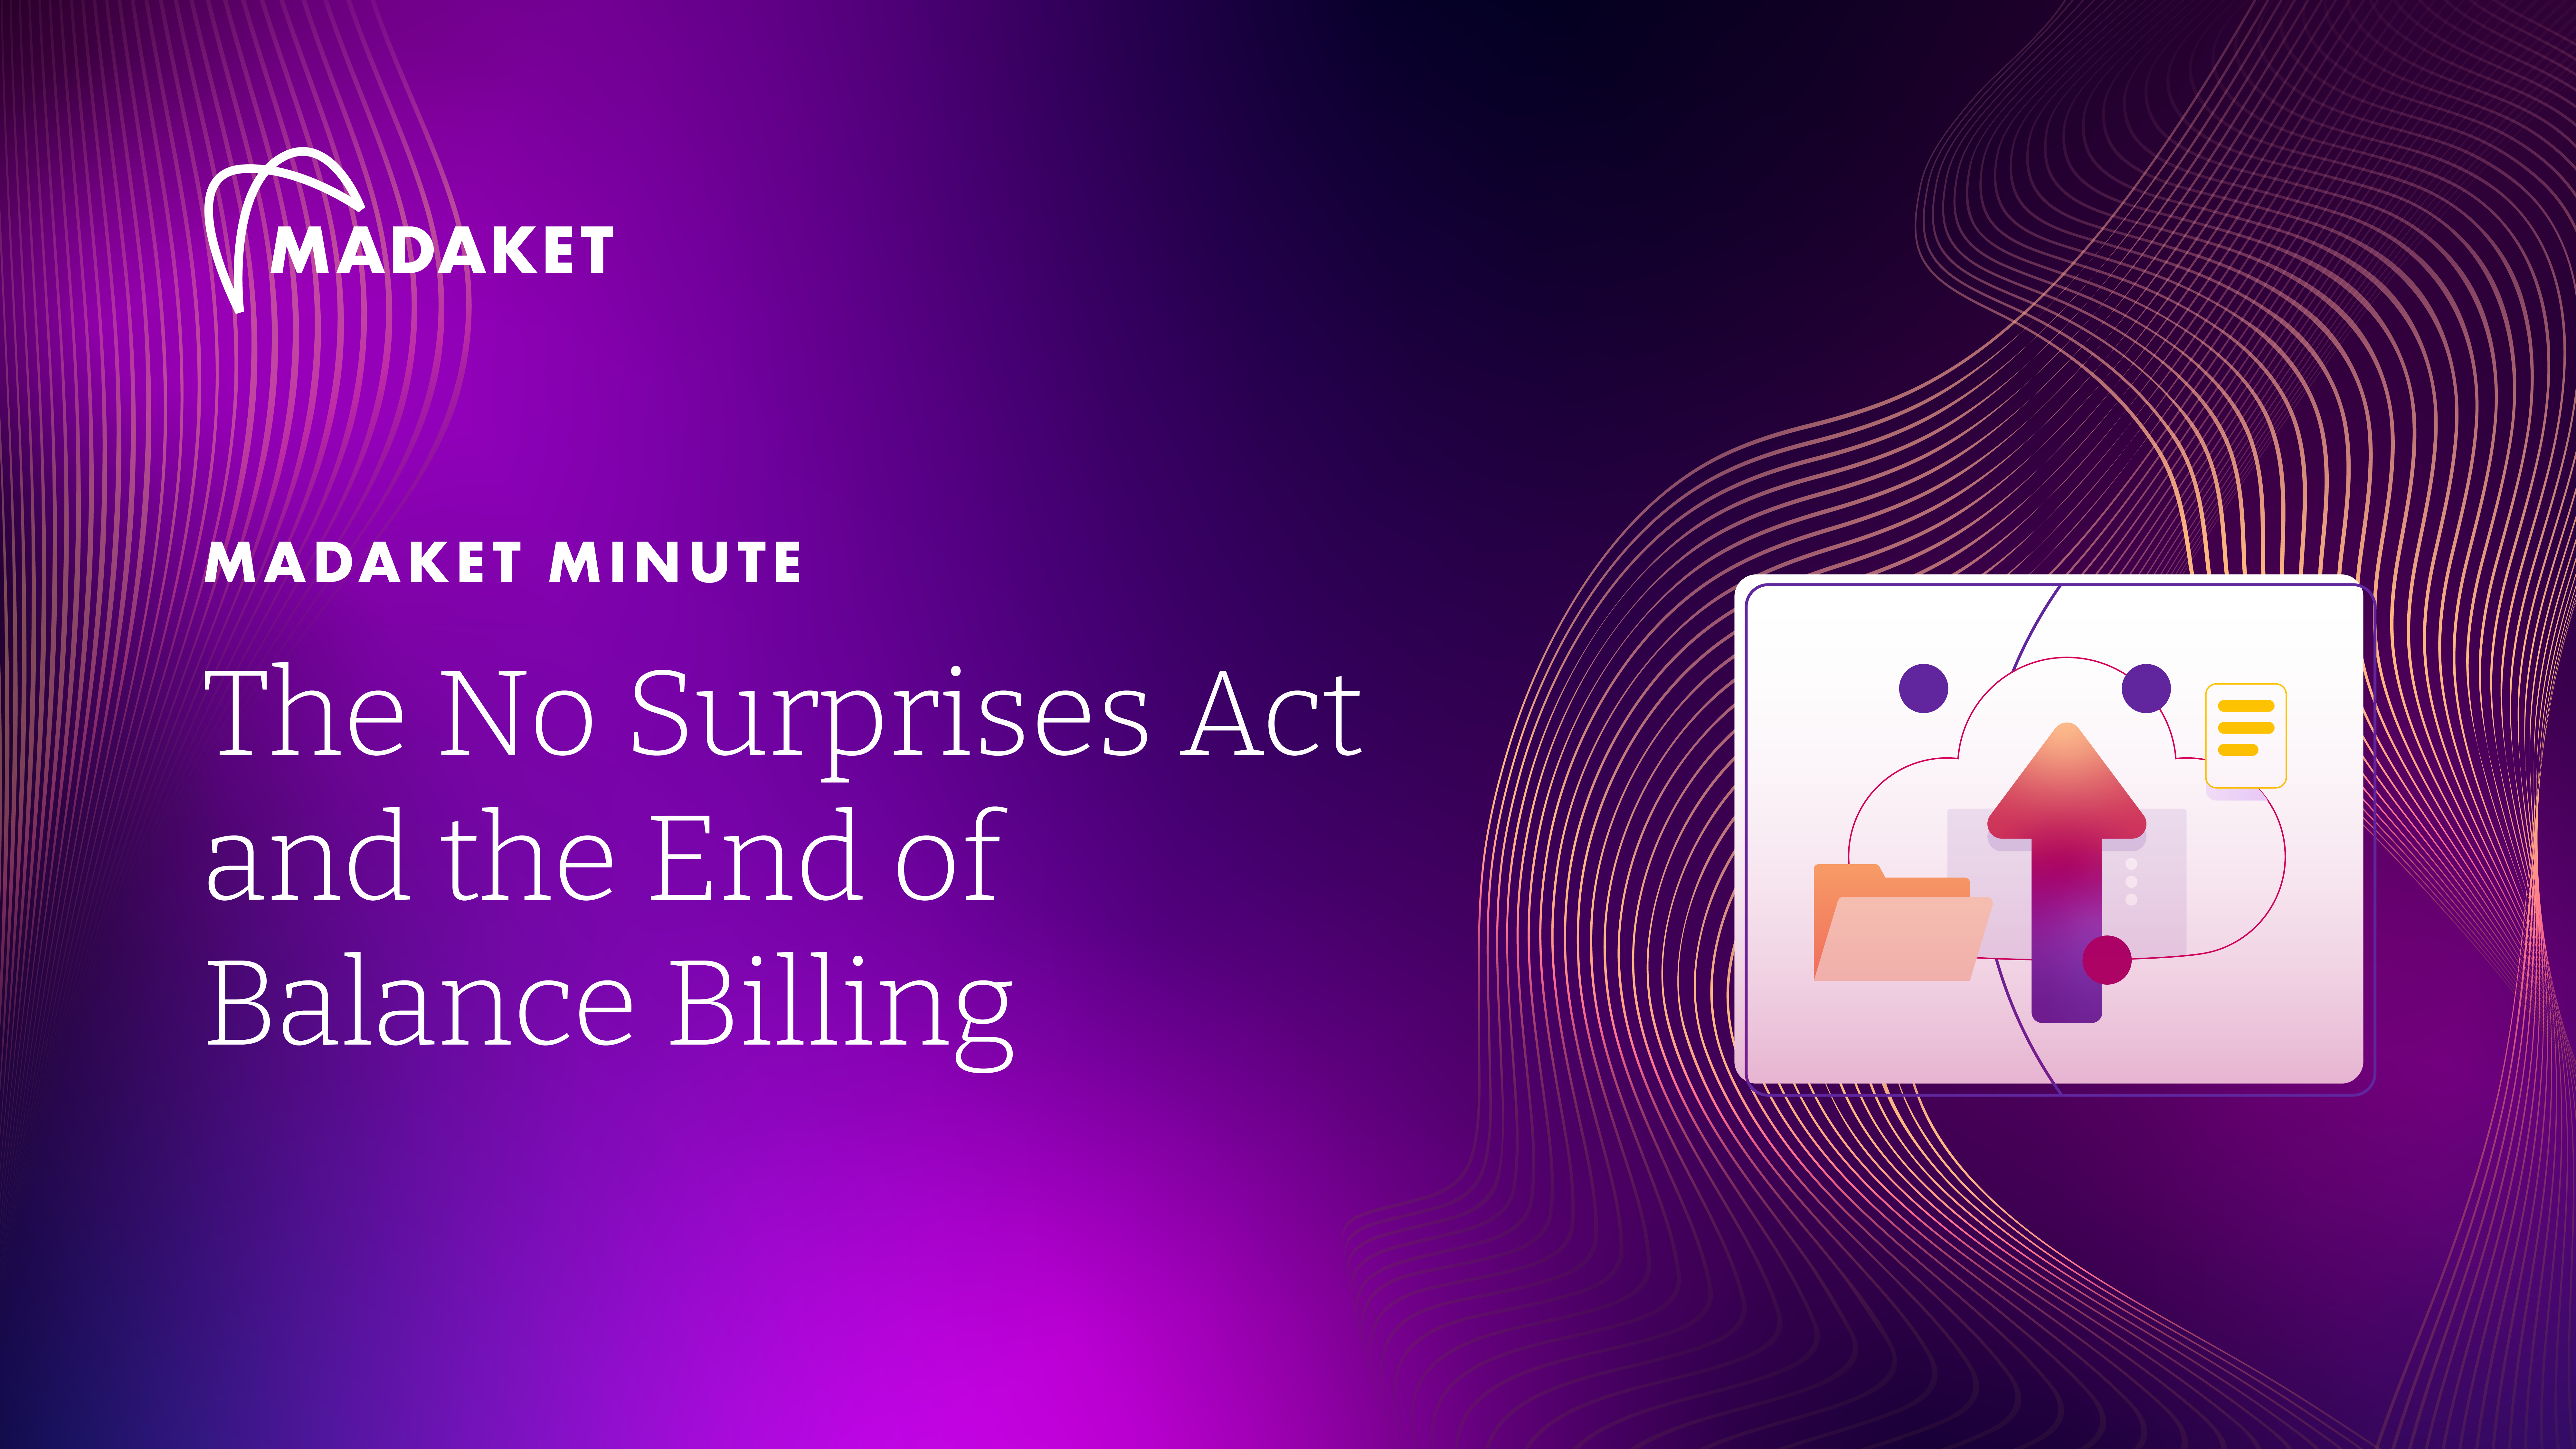 a picture that contains a title "The No Surprises Act and the End of Balance Billing" and an icon